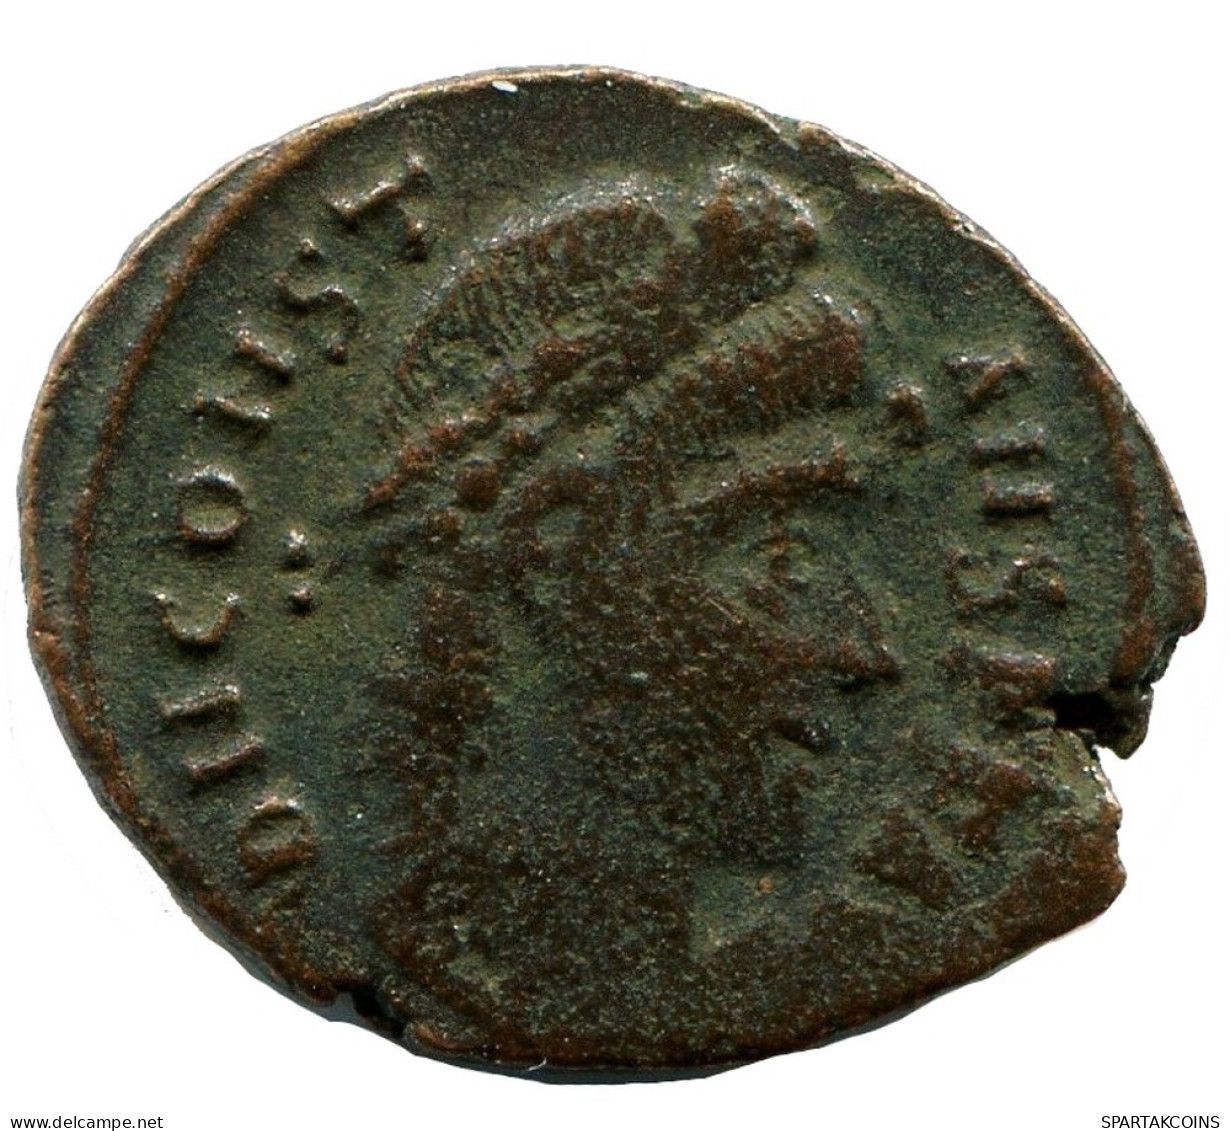 CONSTANS MINTED IN ALEKSANDRIA FROM THE ROYAL ONTARIO MUSEUM #ANC11441.14.U.A - The Christian Empire (307 AD Tot 363 AD)